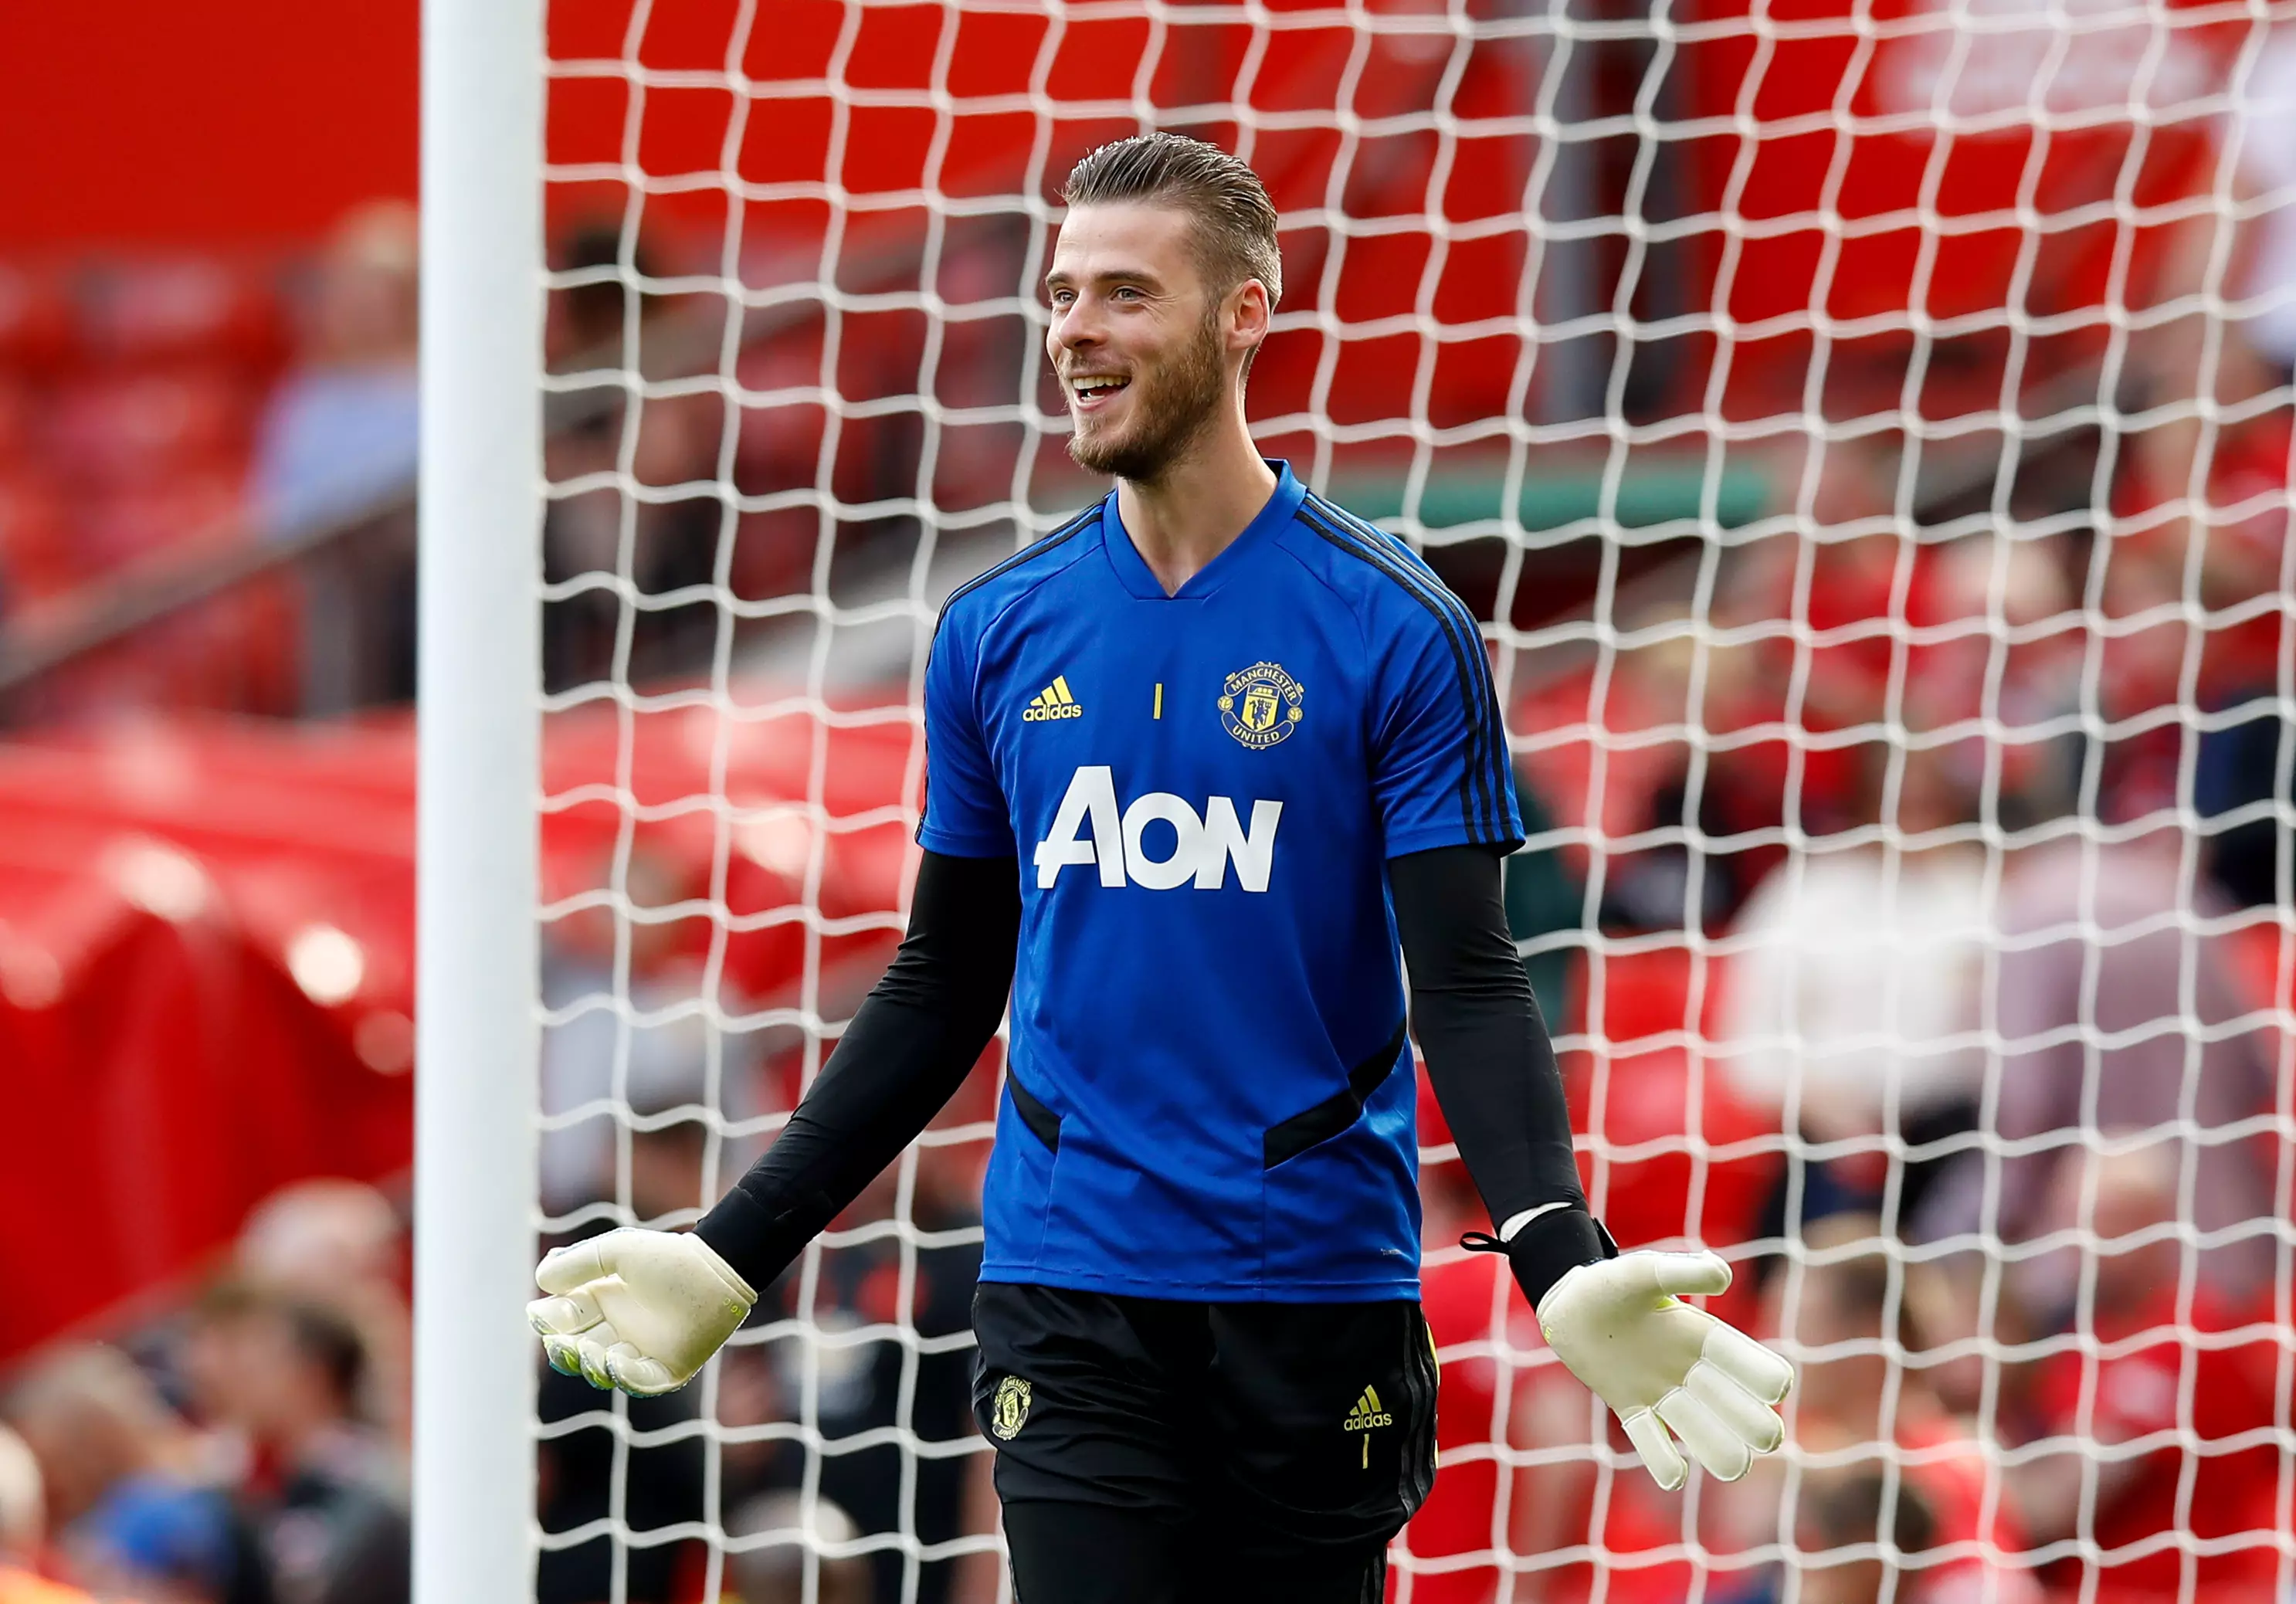 De Gea is the best United player according to the list. Image: PA Images